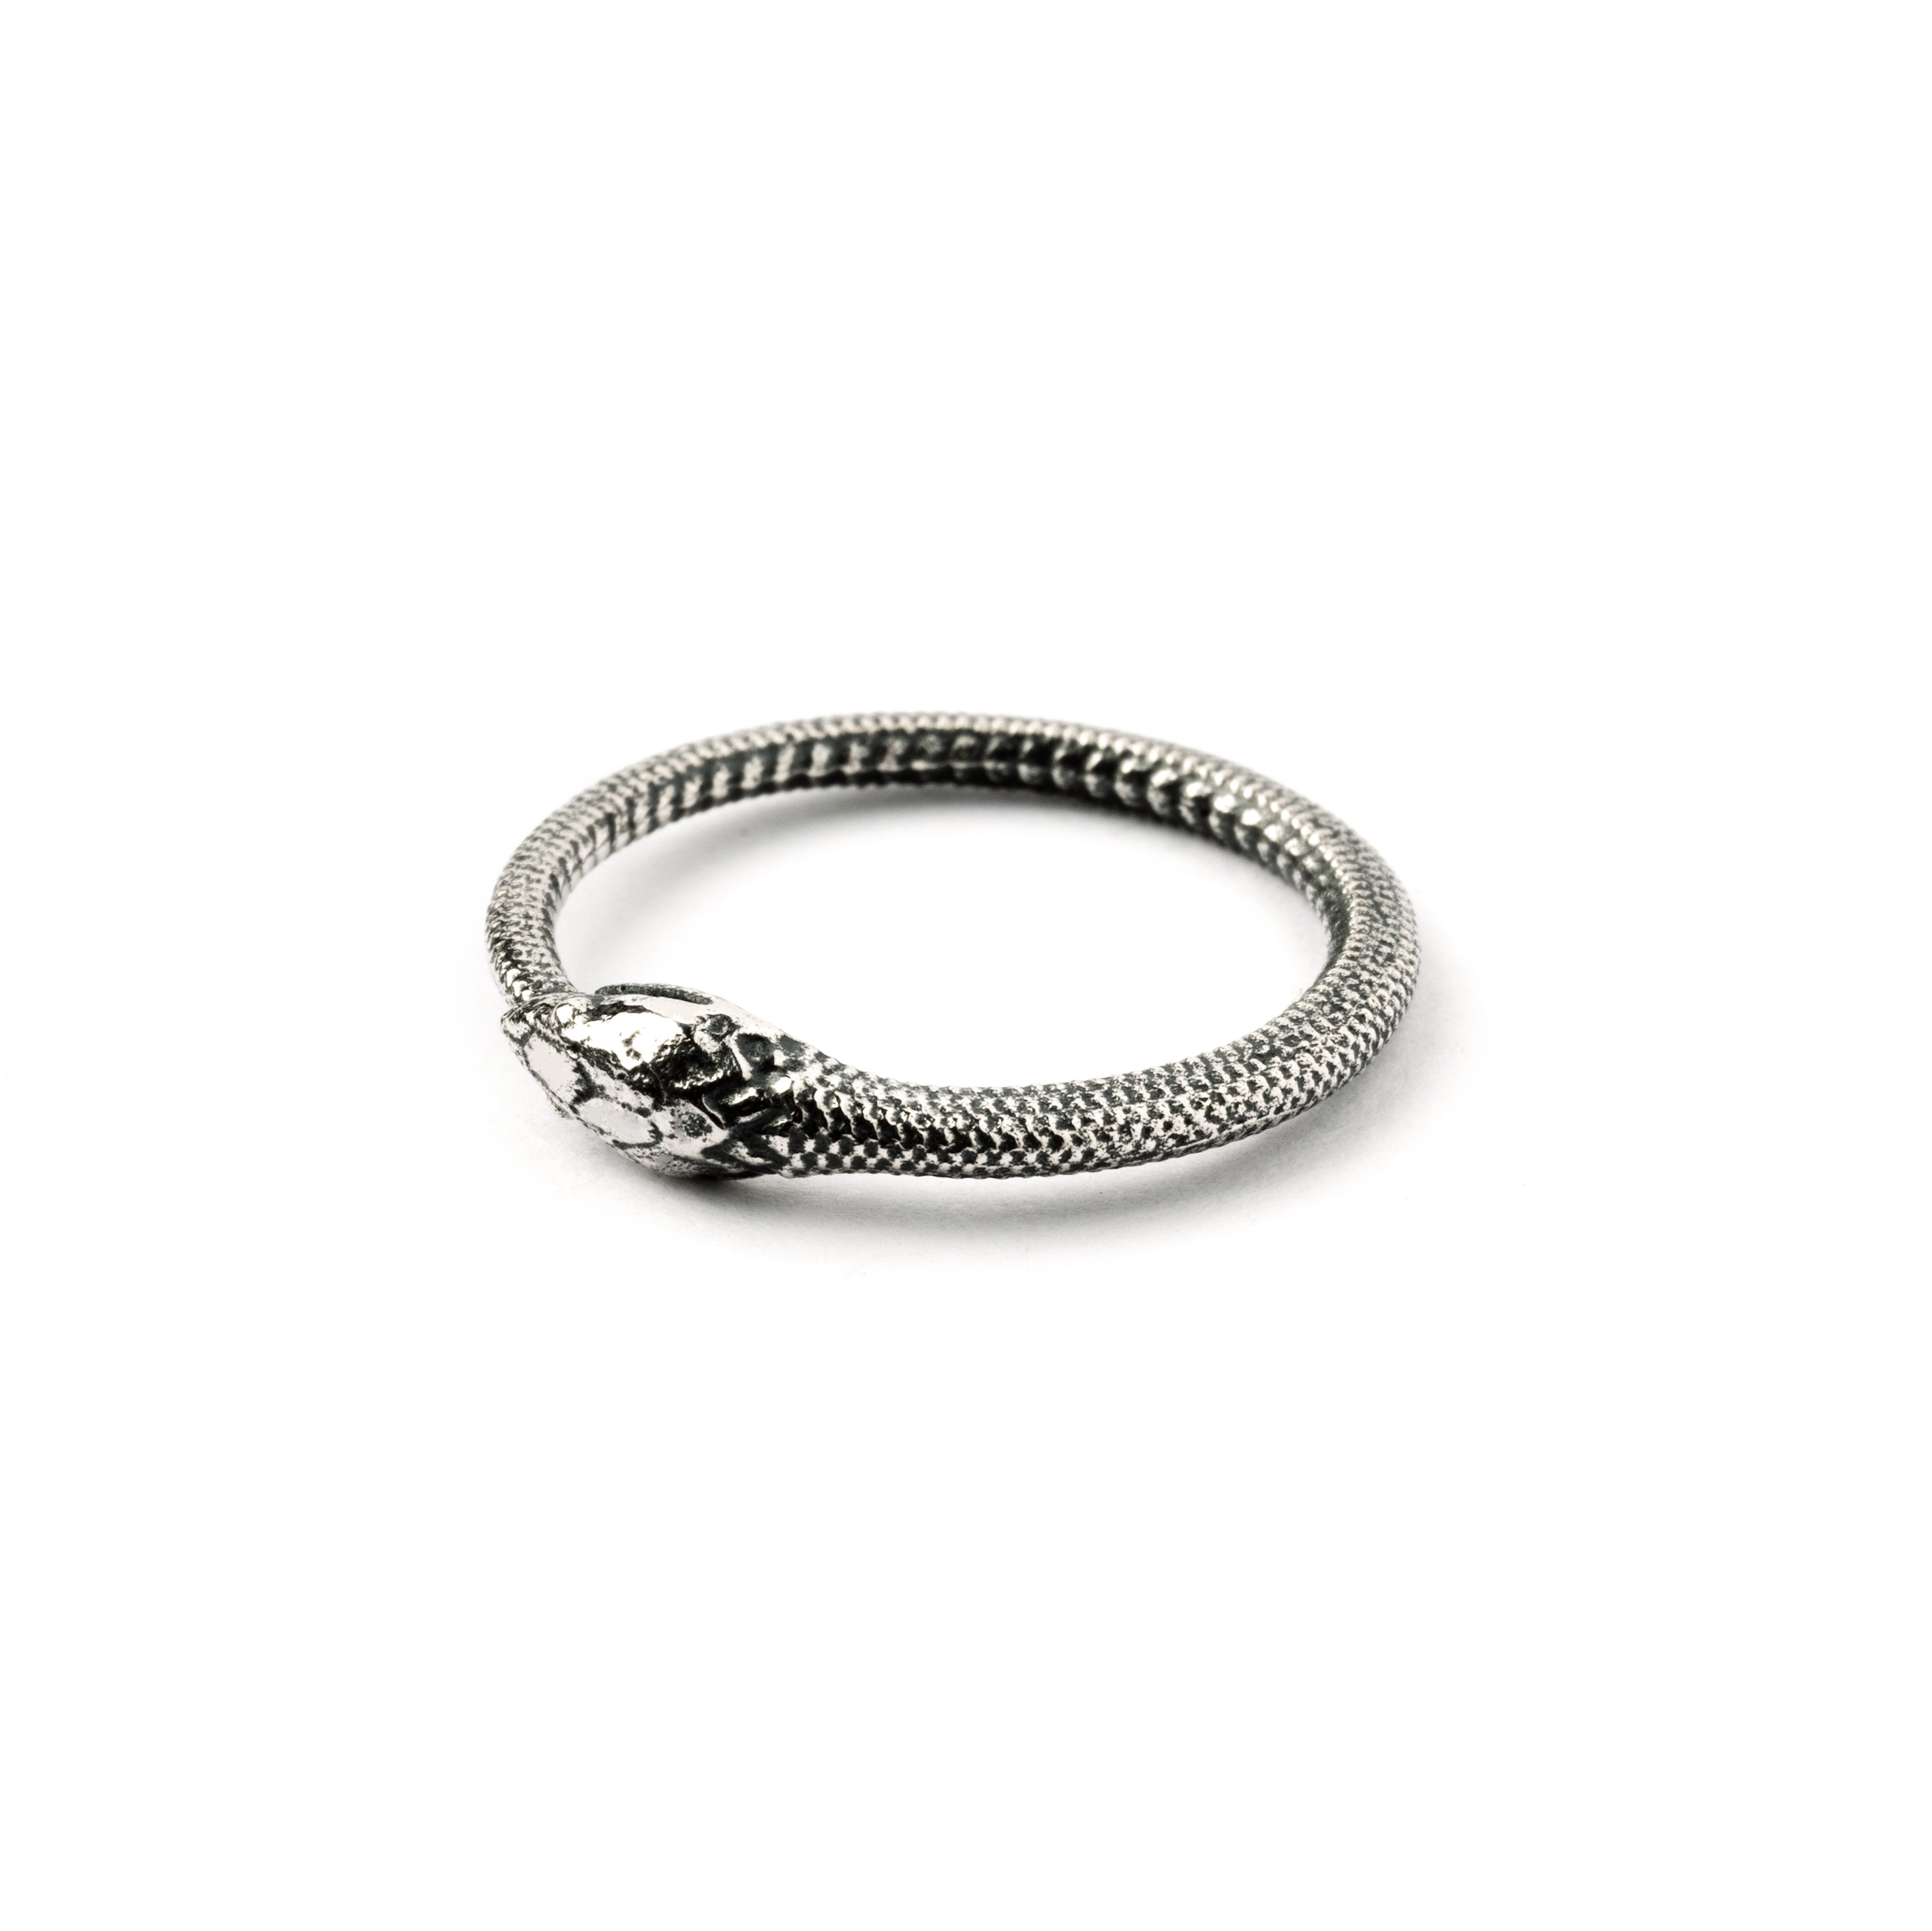 Silver Ouroboros snake band ring left side view